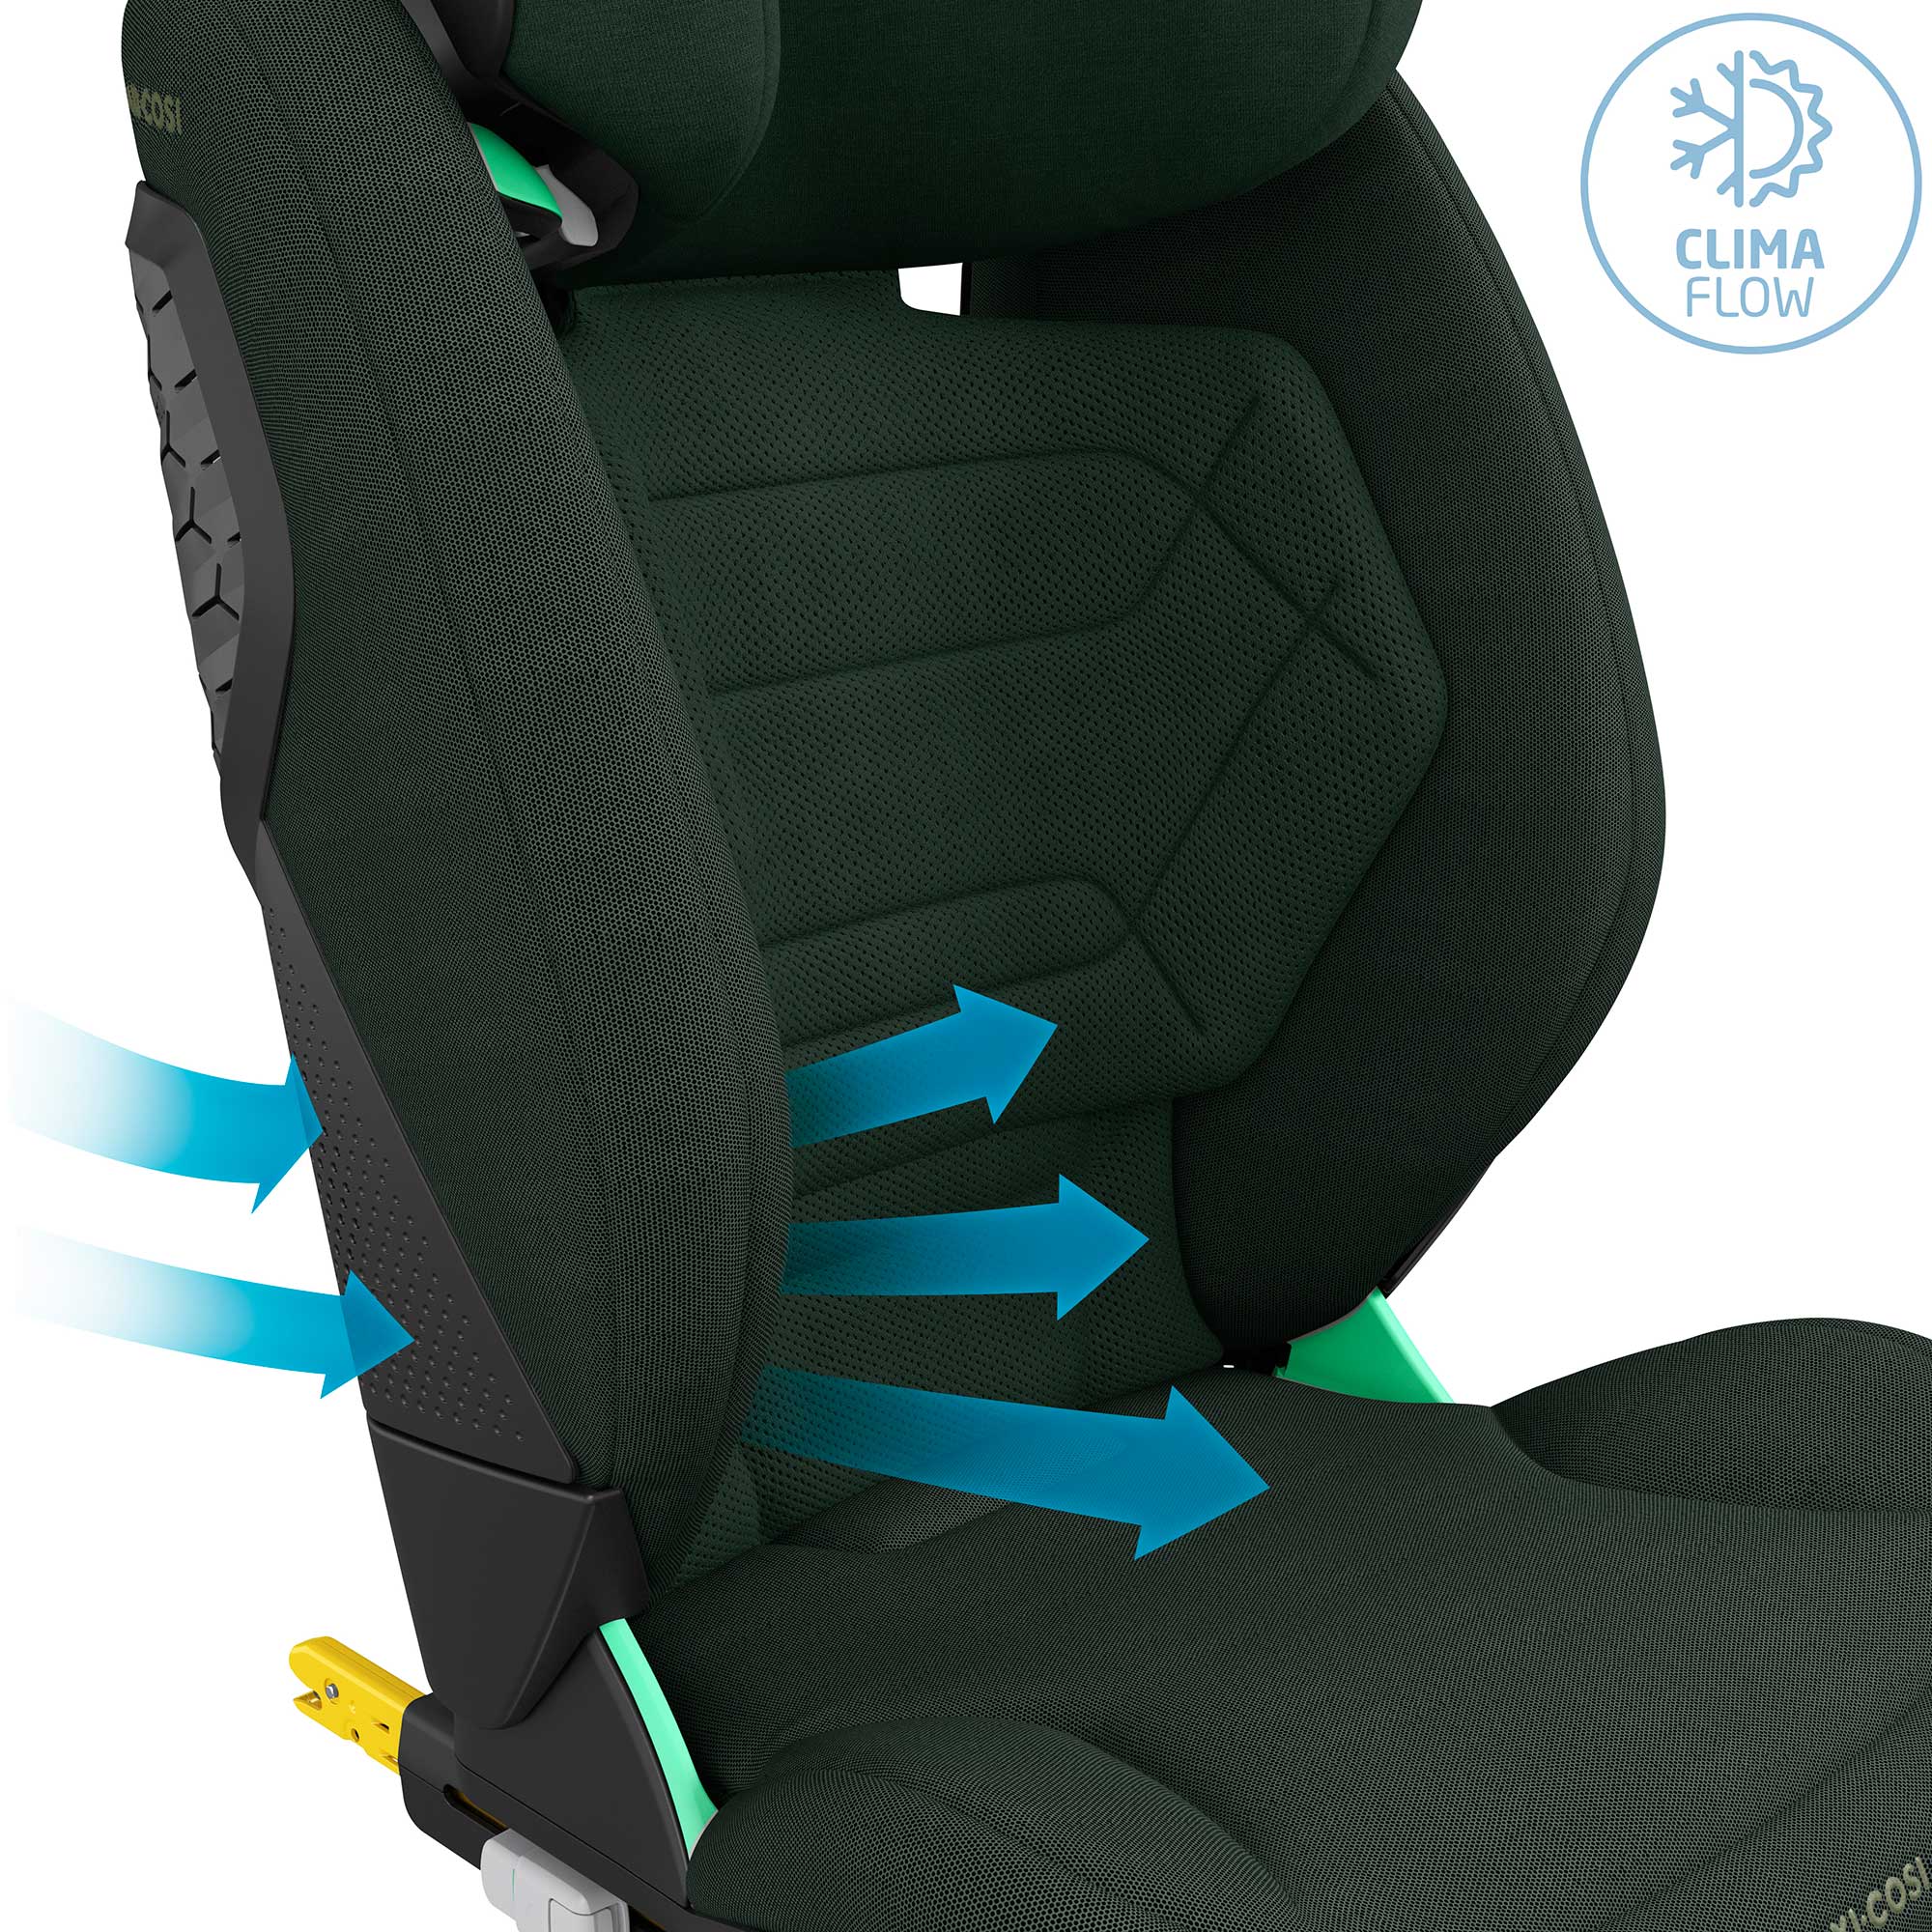 Maxi-Cosi Rodifix Pro 2 i-size Booster Seat in Authentic Green Highback Booster Seats 8800490110 8712930186748